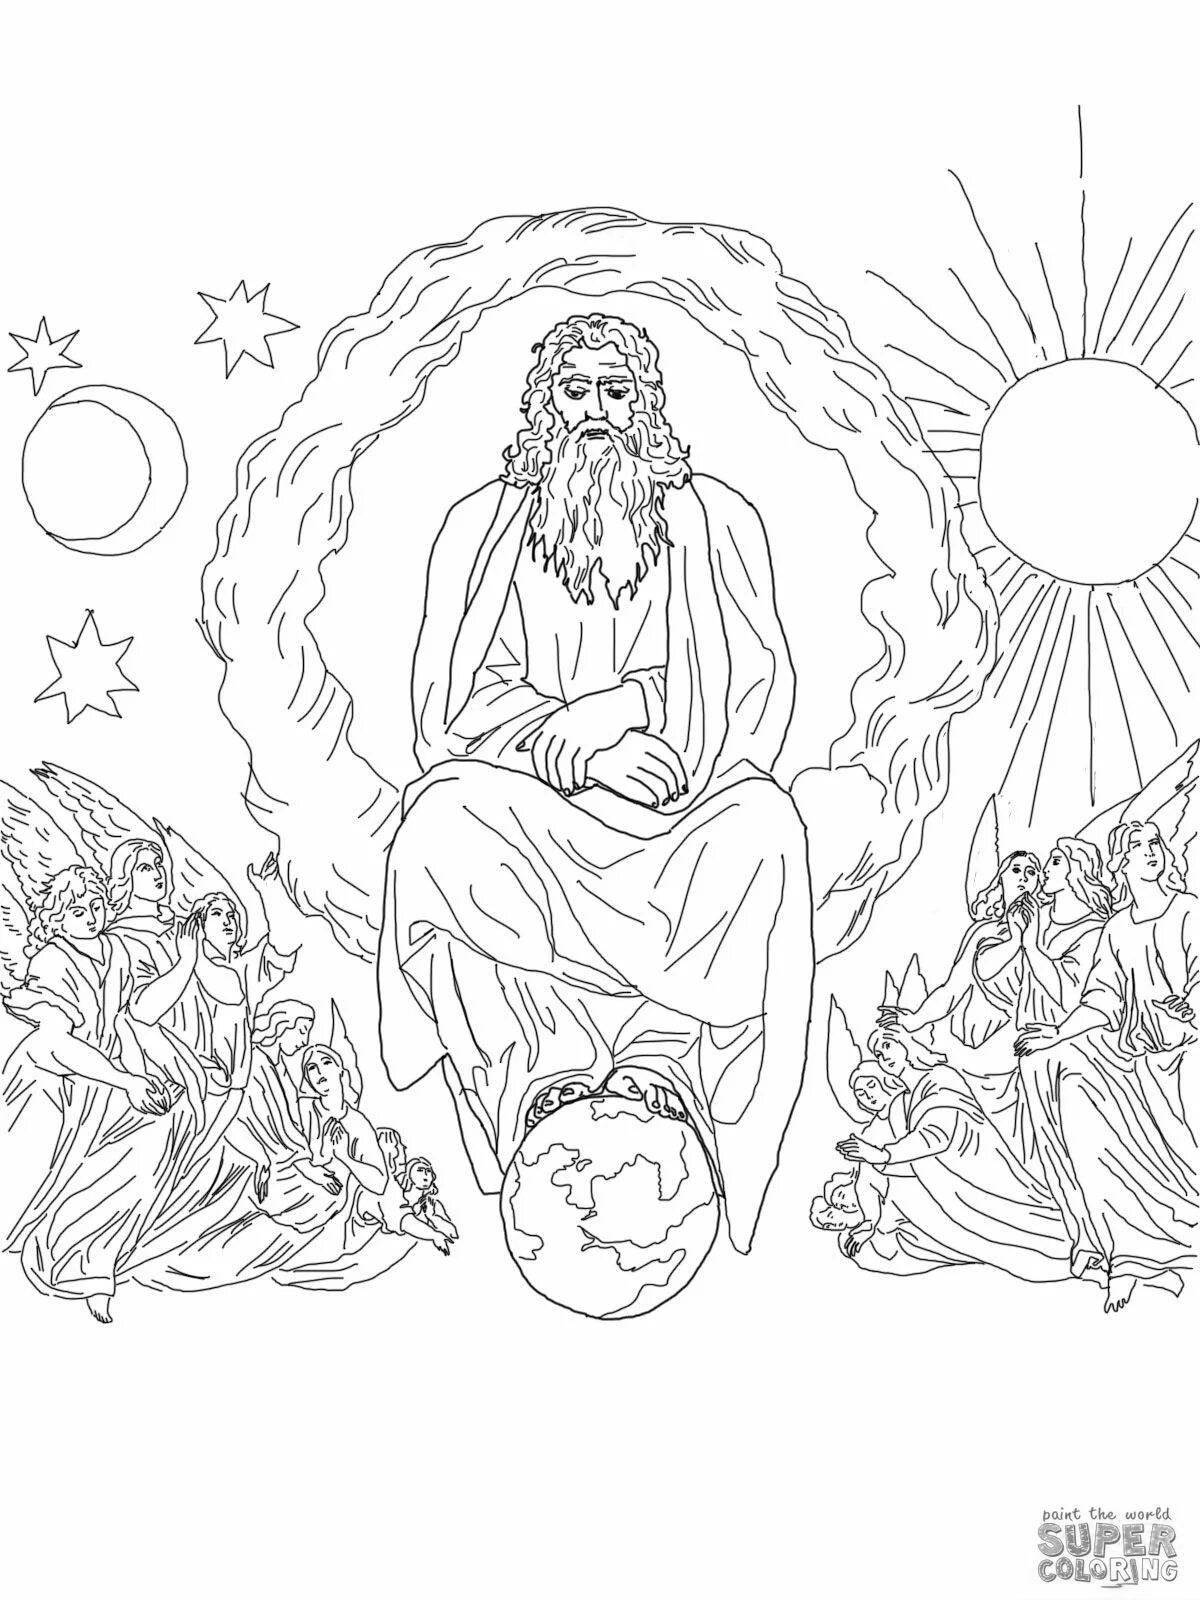 Exalted sky world coloring page